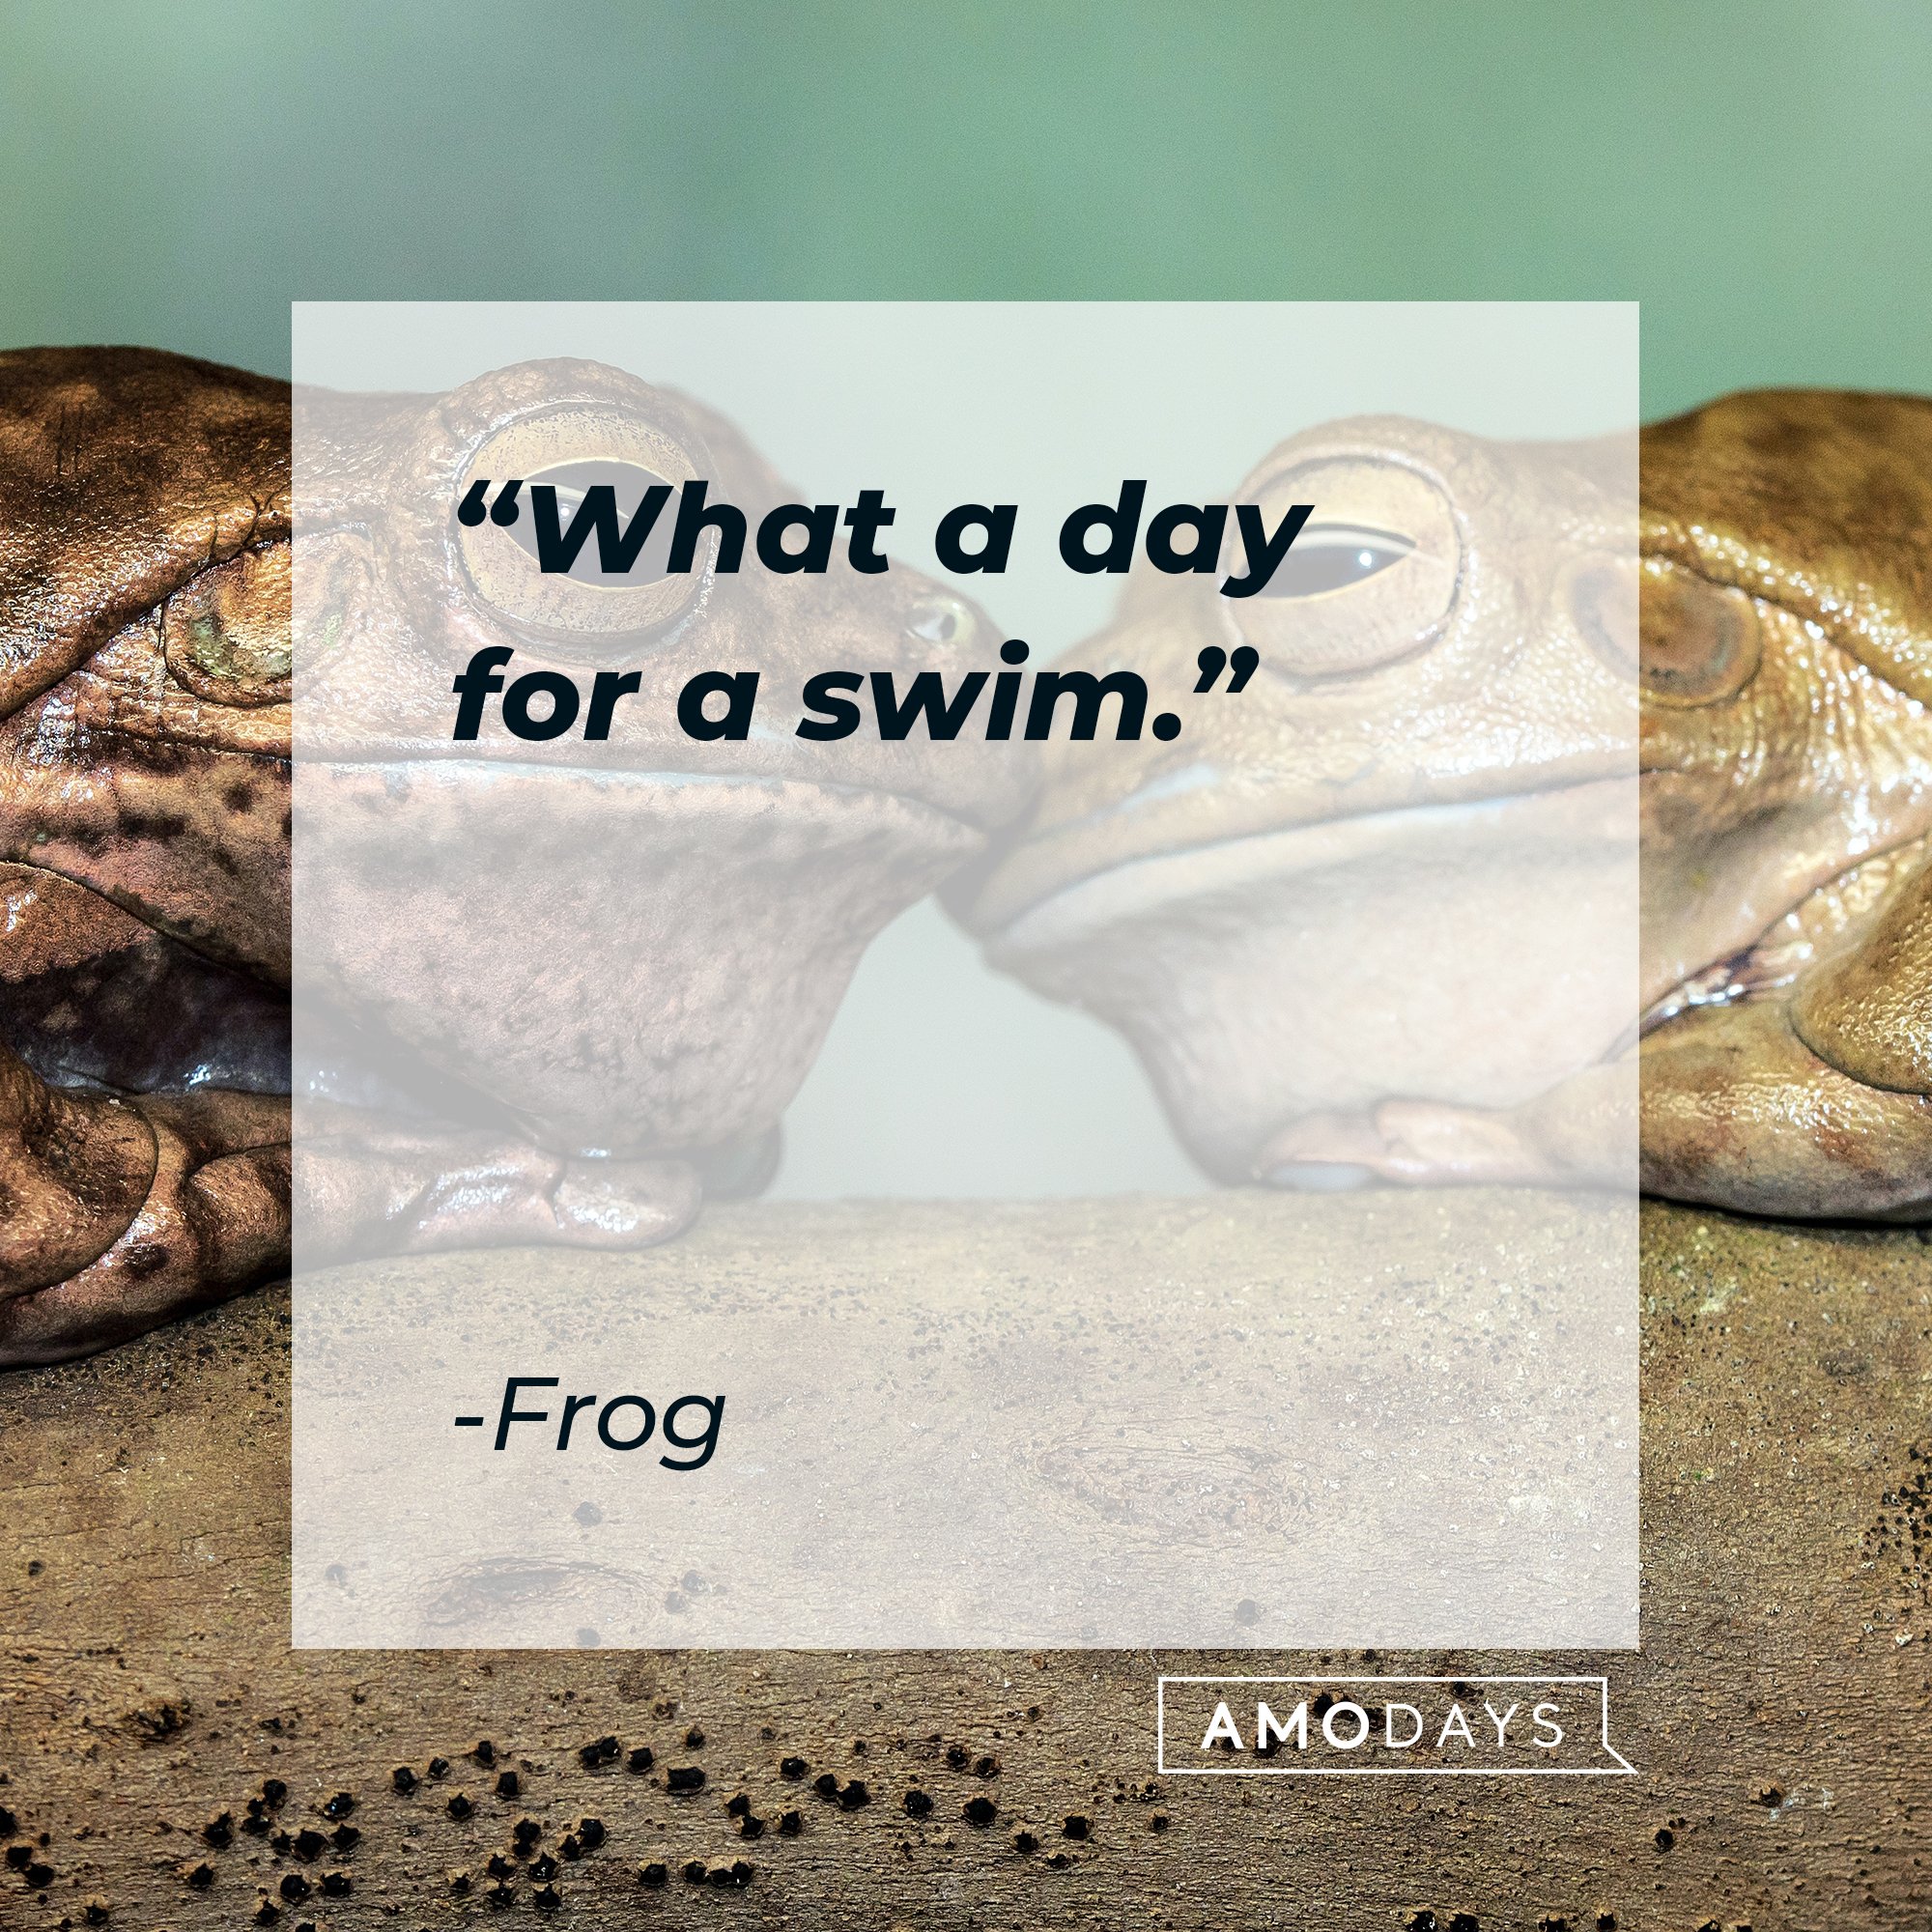 Frog's quote: "What a day for a swim." | Image: AmoDays